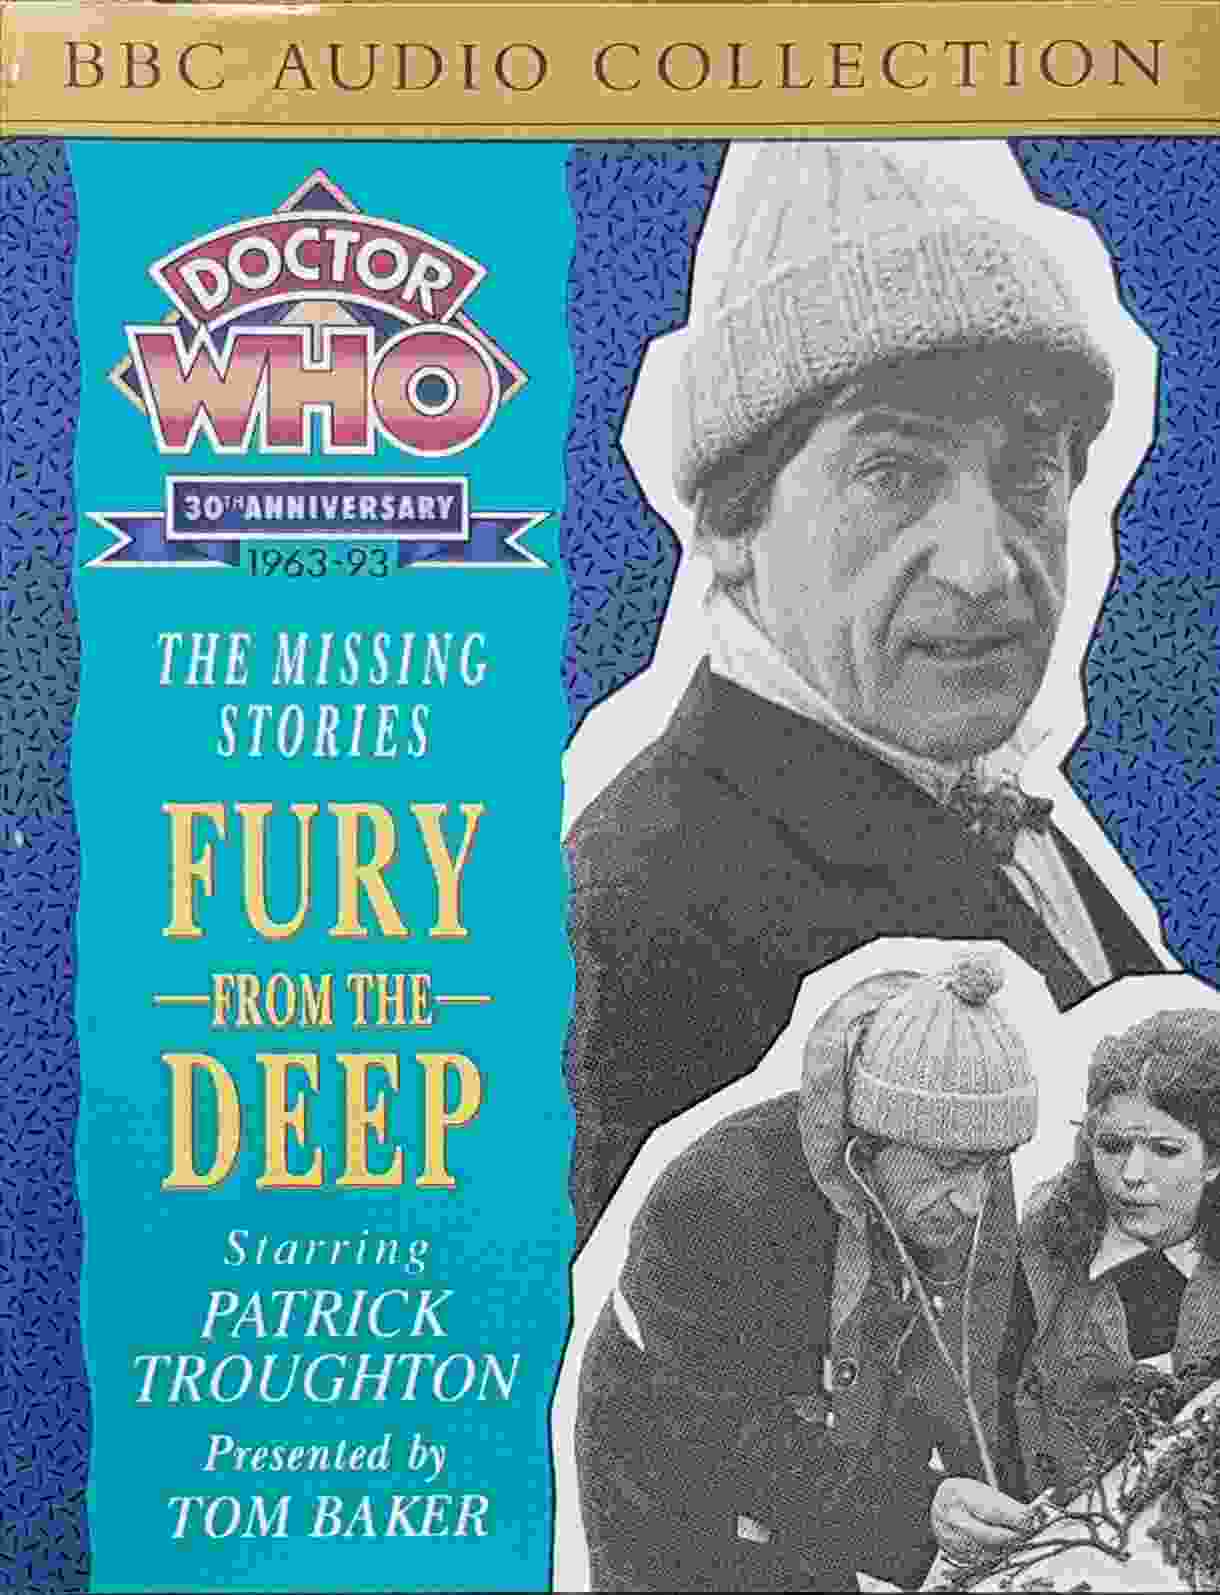 Picture of ZBBC 1434 Doctor Who - Fury from the deep by artist Victor Pemberton from the BBC cassettes - Records and Tapes library